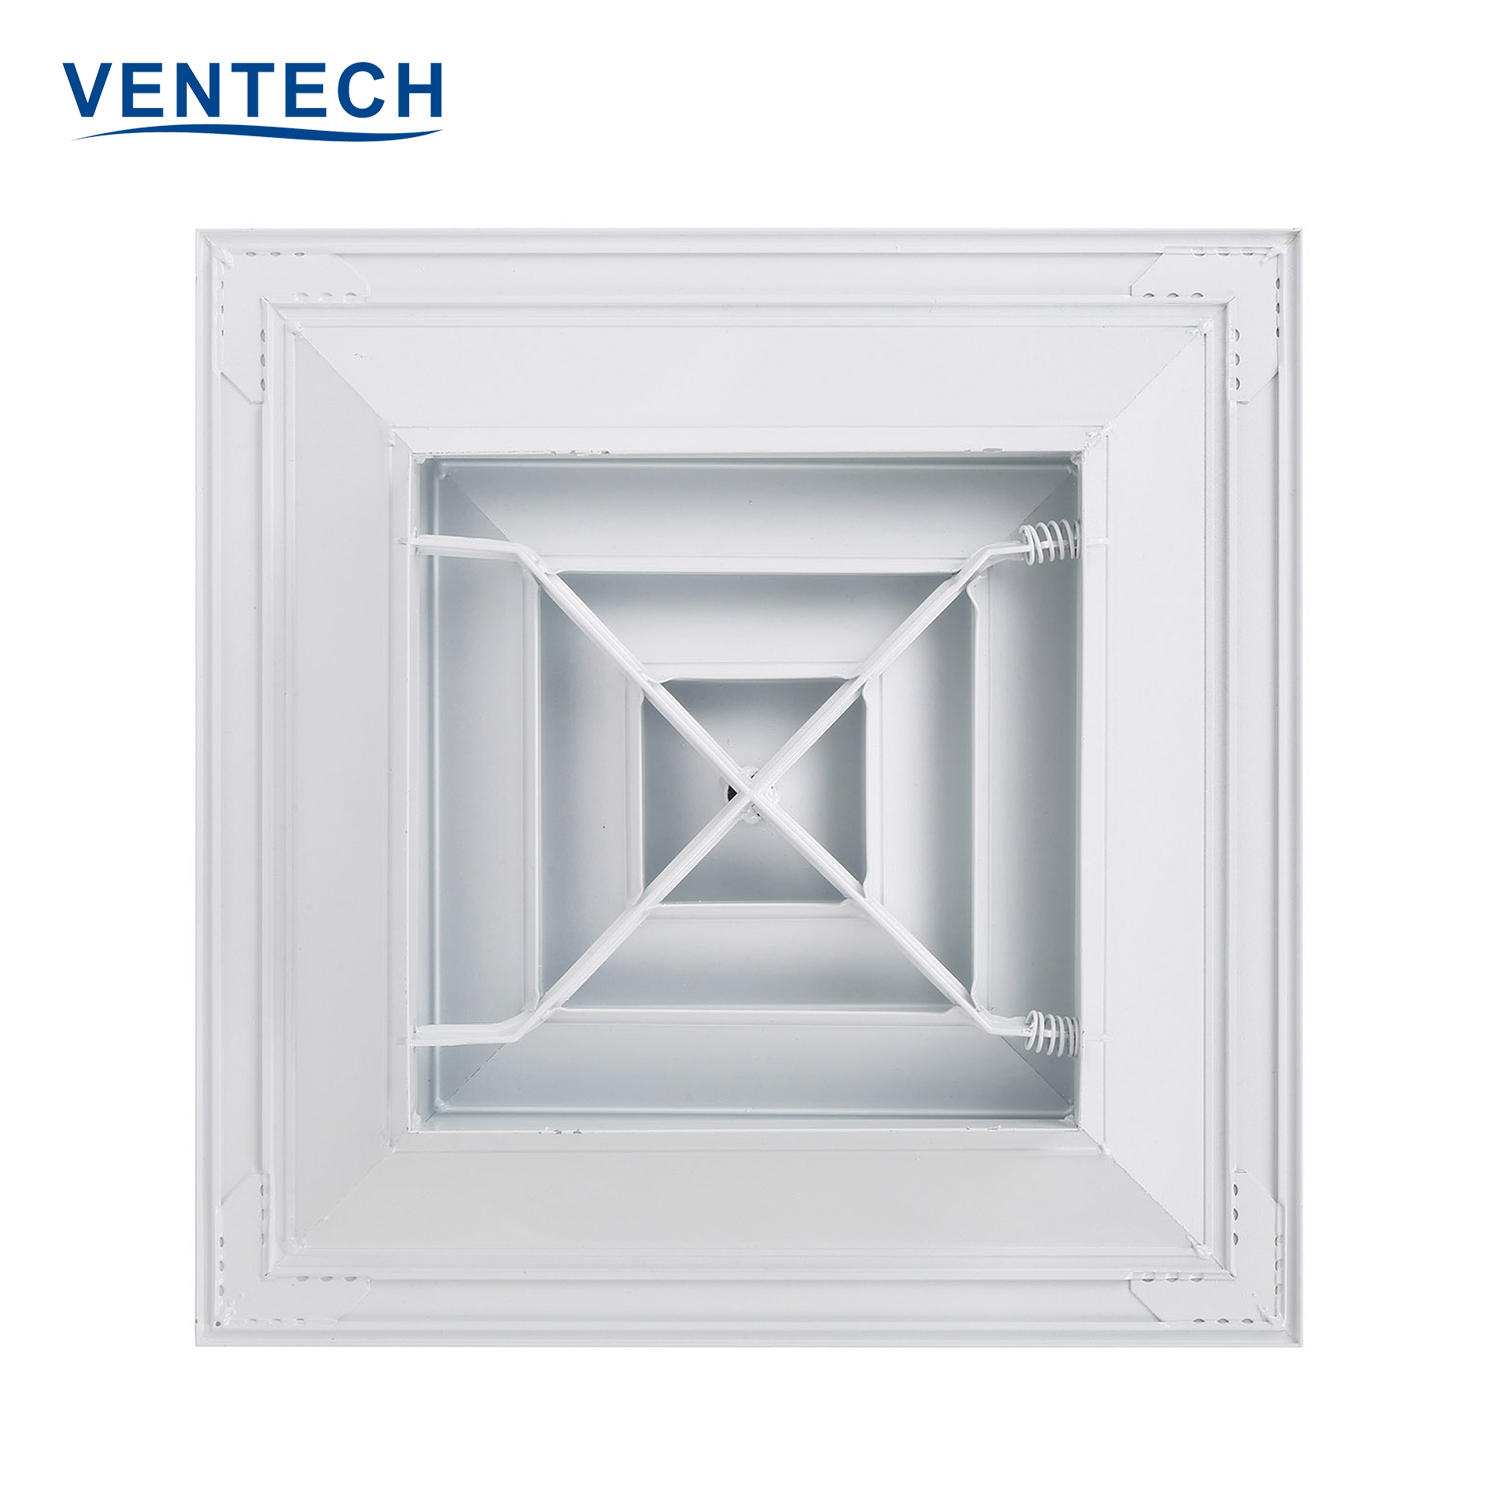 High Quality HVAC VENTECH Exhaust Air Conditioning Duct Aluminum Square Ceiling Diffuser